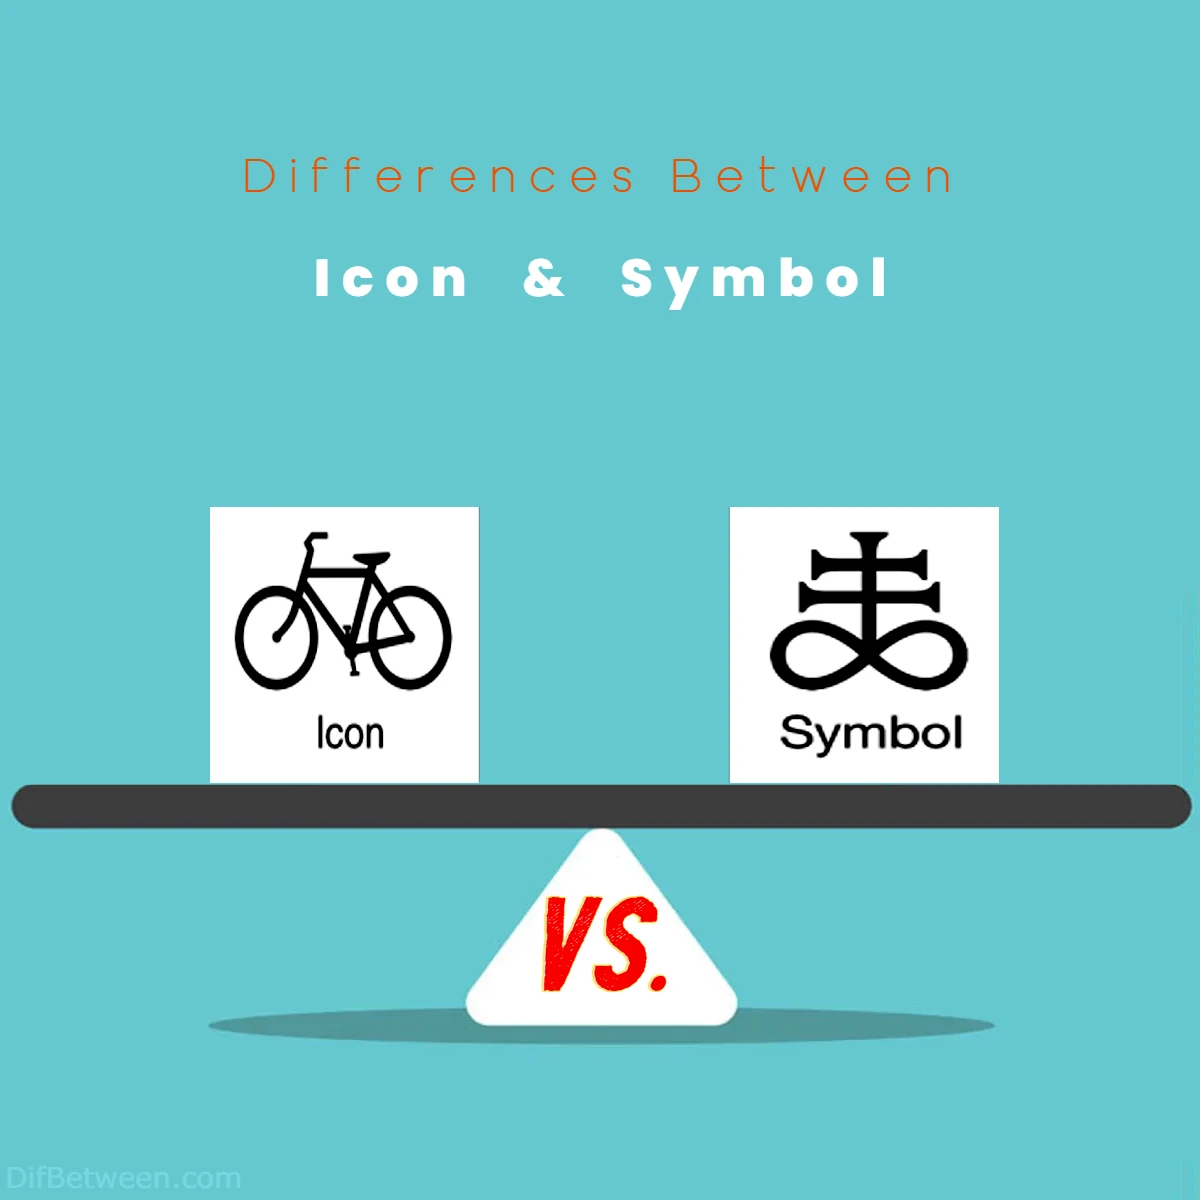 Differences Between Icon vs Symbol